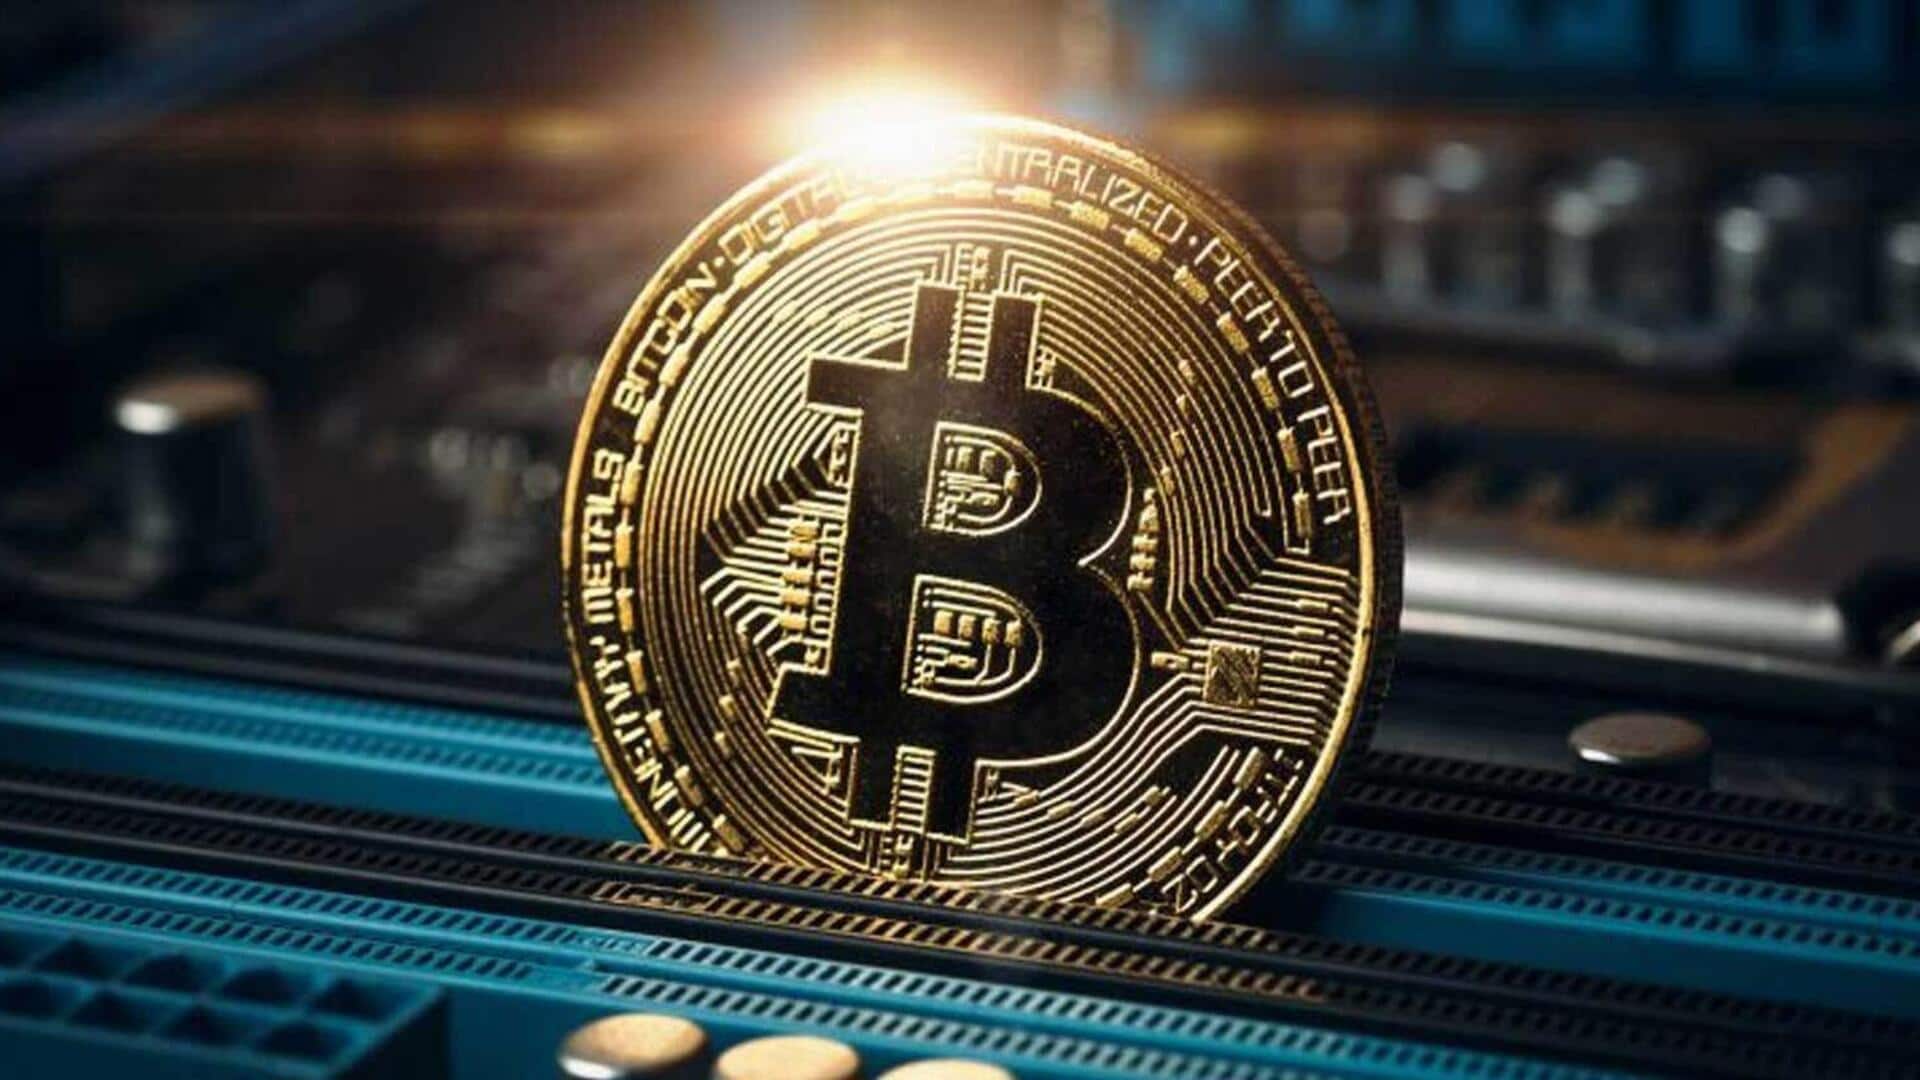 Bitcoin crosses $37,400 mark, up 120% this year